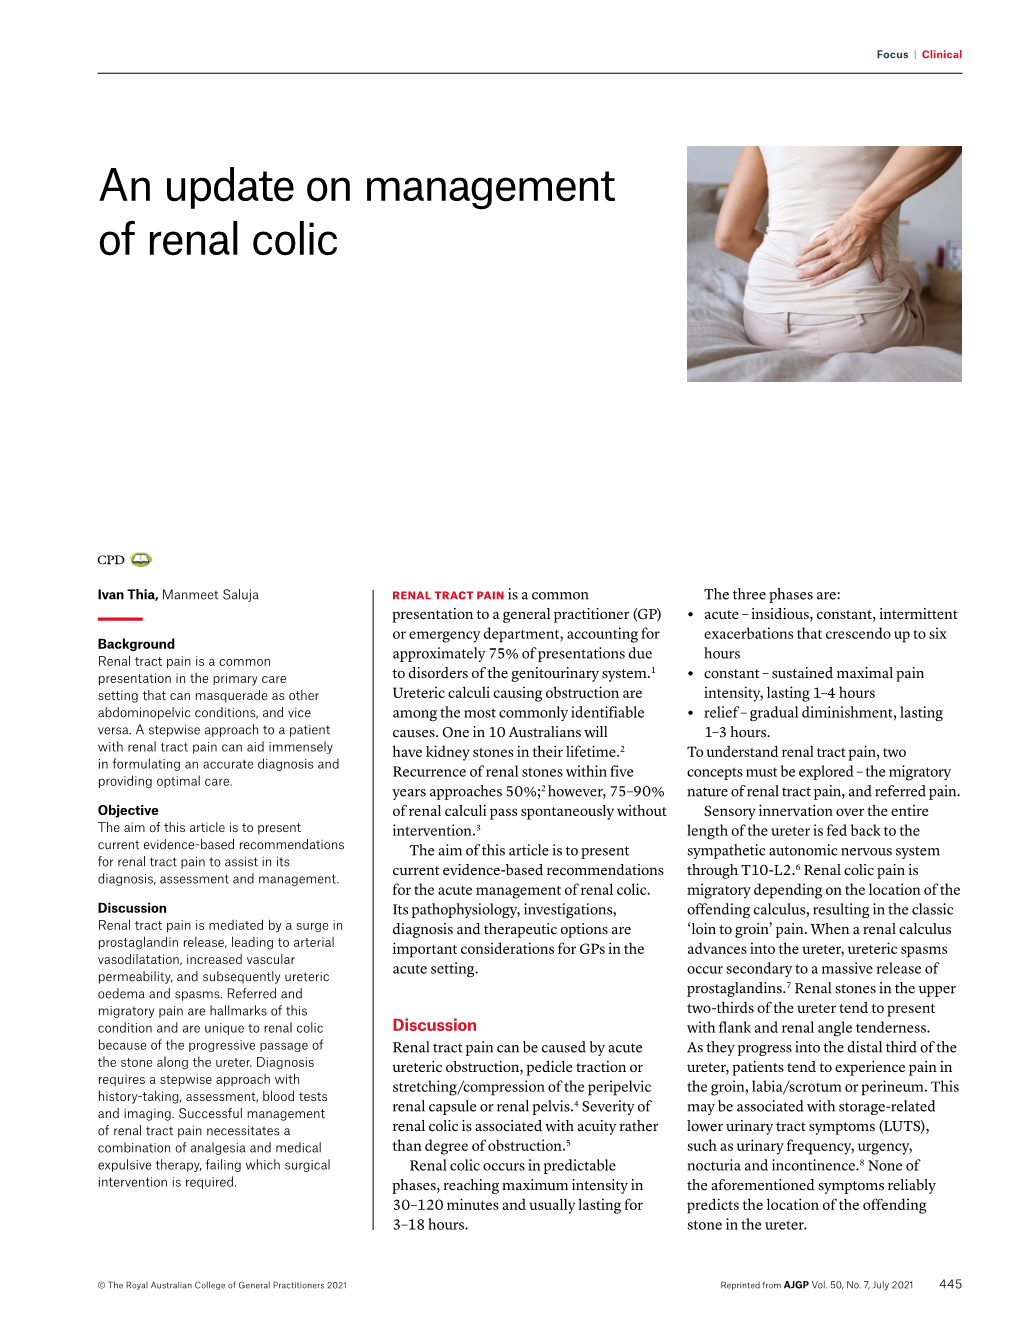 An Update on Management of Renal Colic